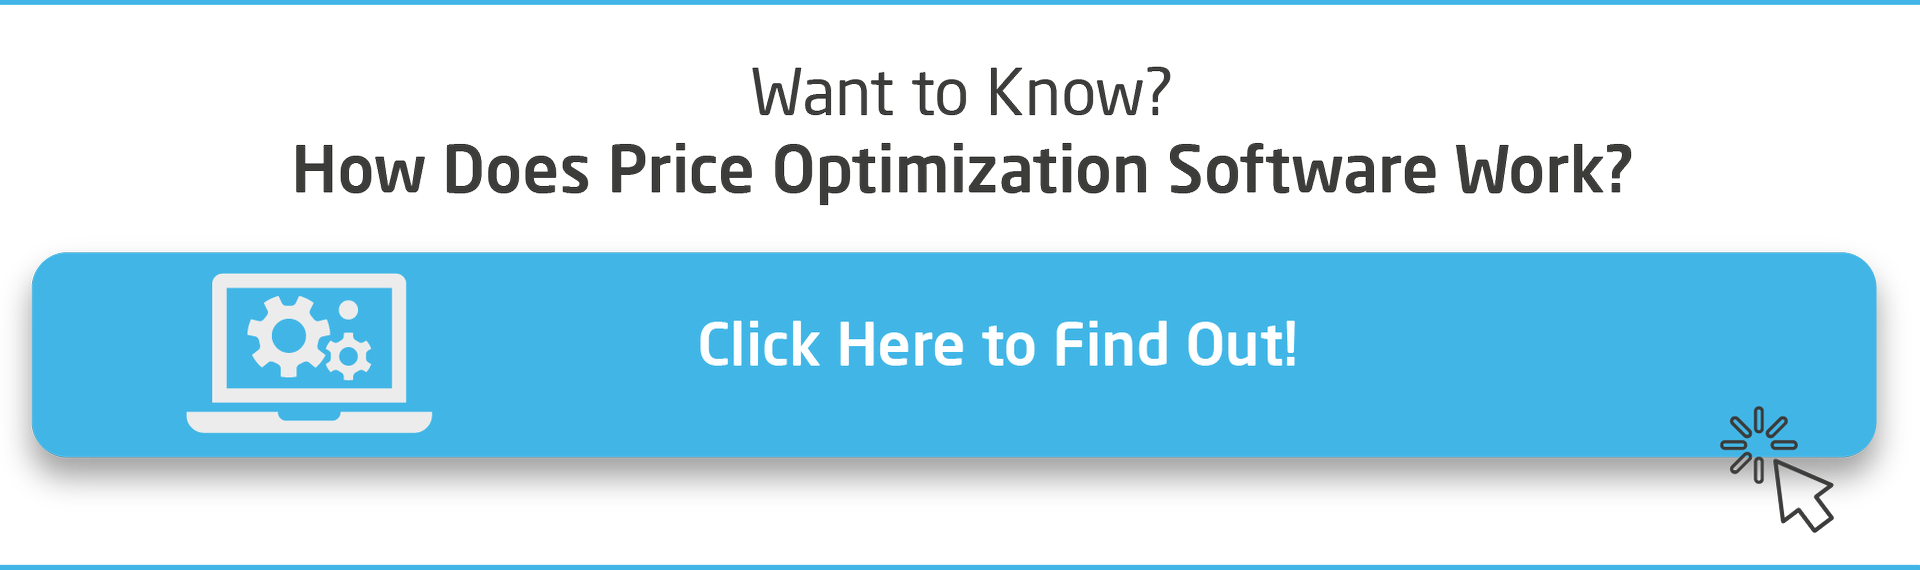 CTA-How-Does-Price-Optimization-Software-Work